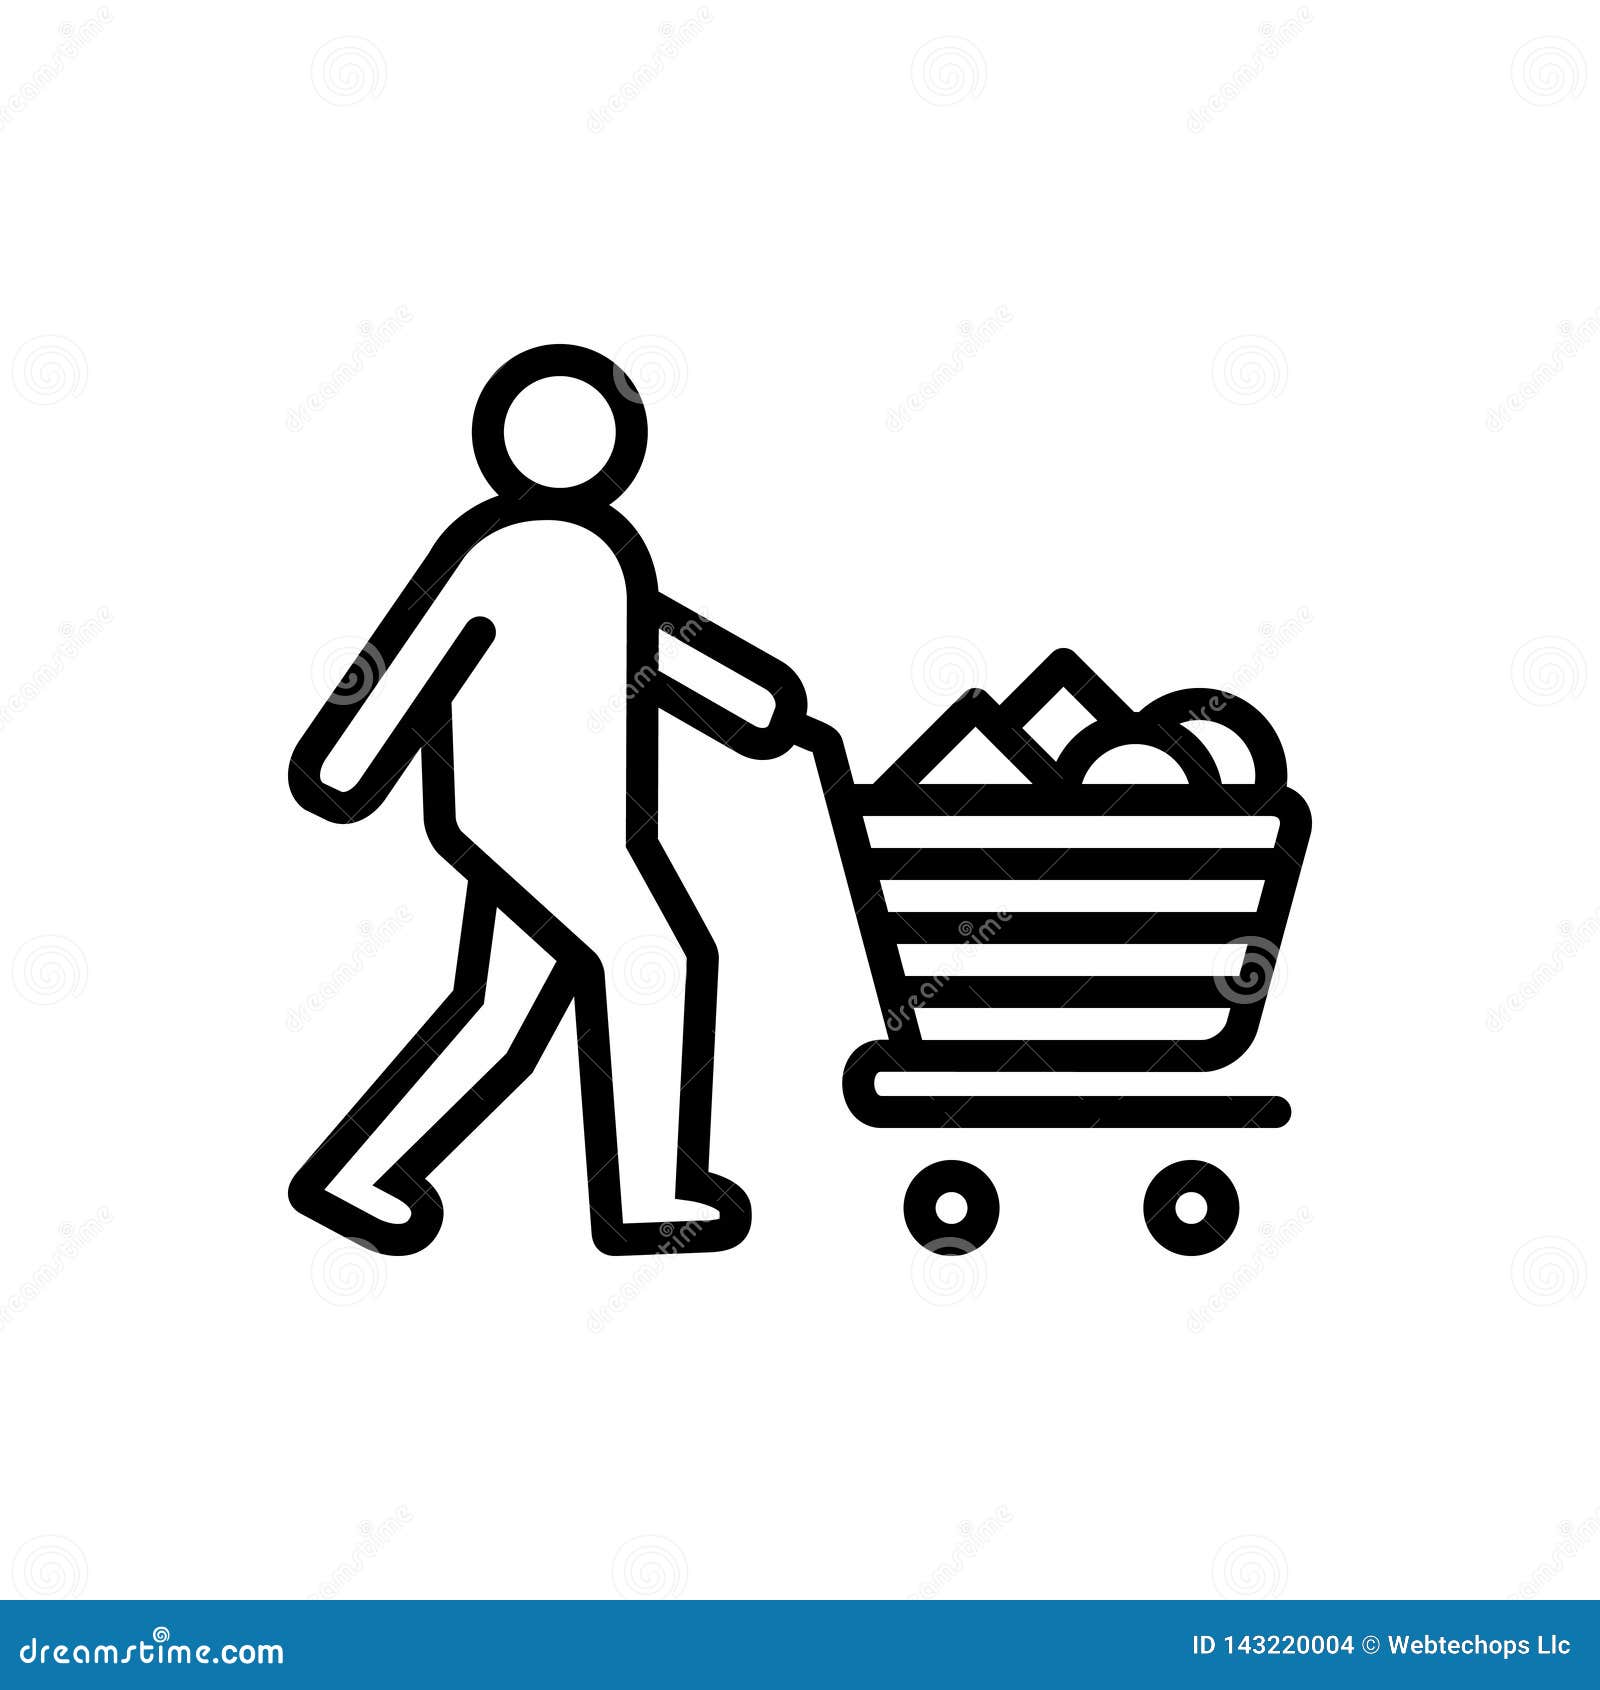 black line icon for consumable, acquisition and cart